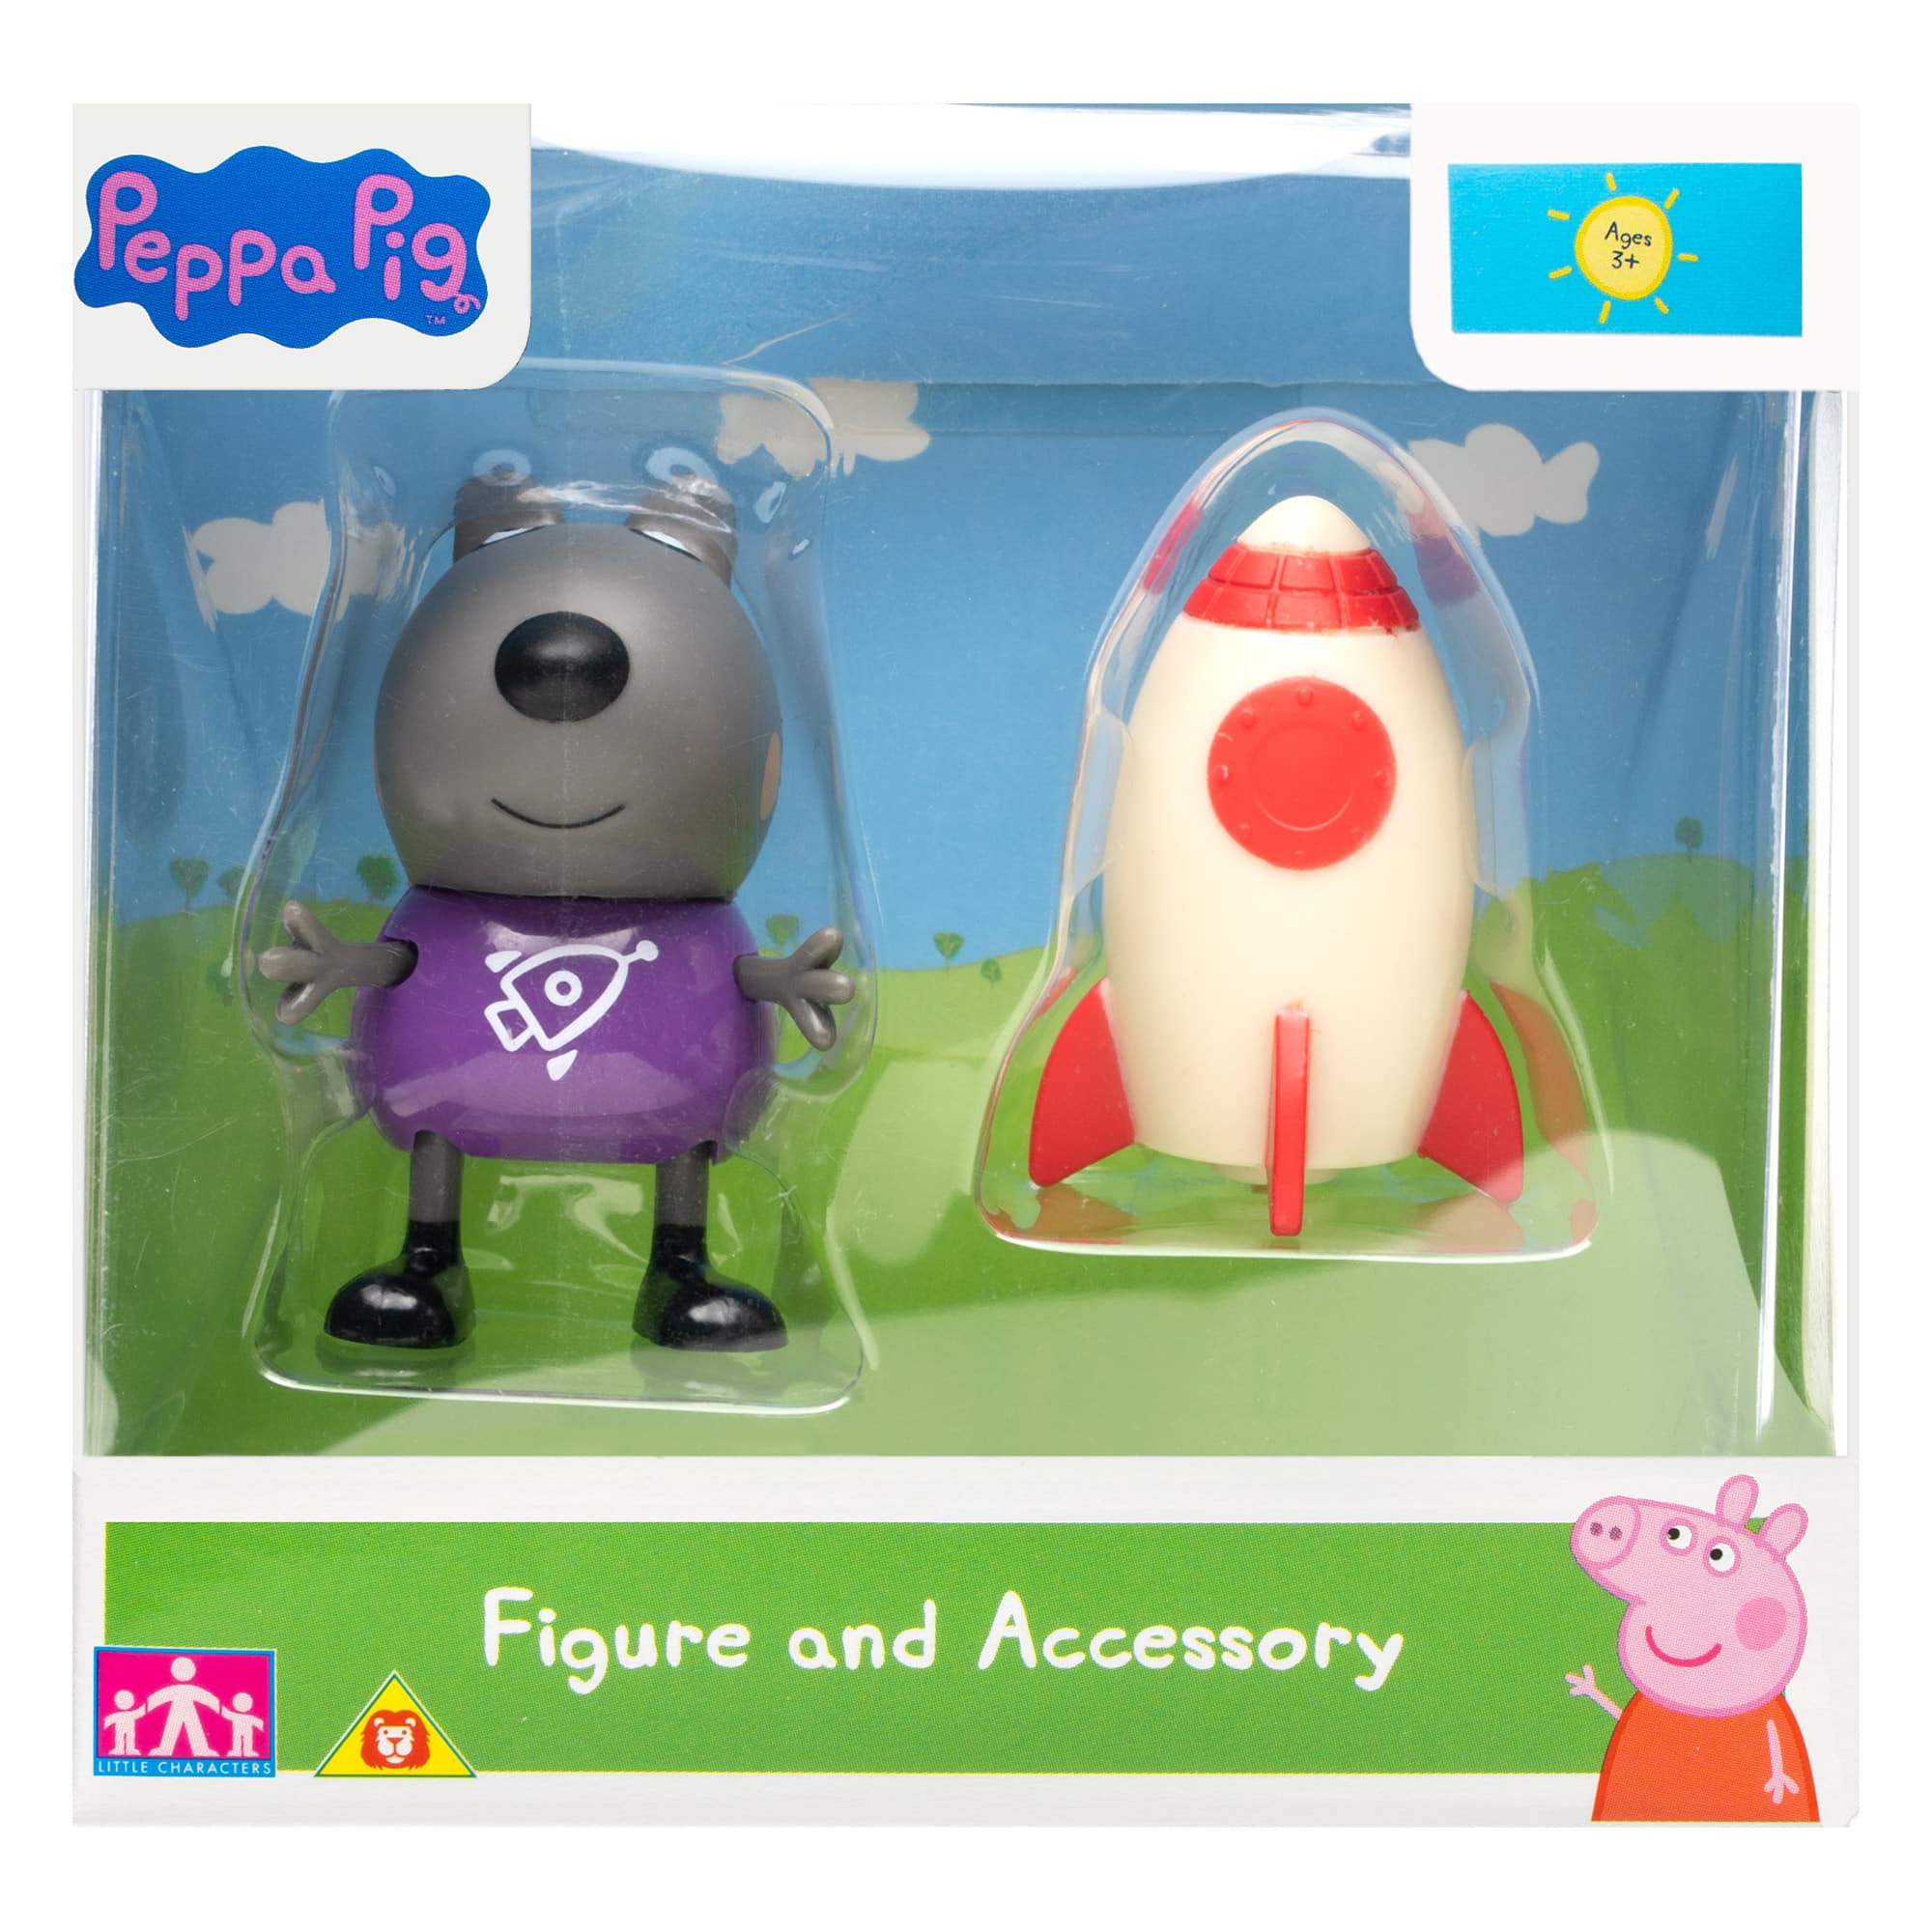 Peppa Pig - Figure and Accessory - Assorted